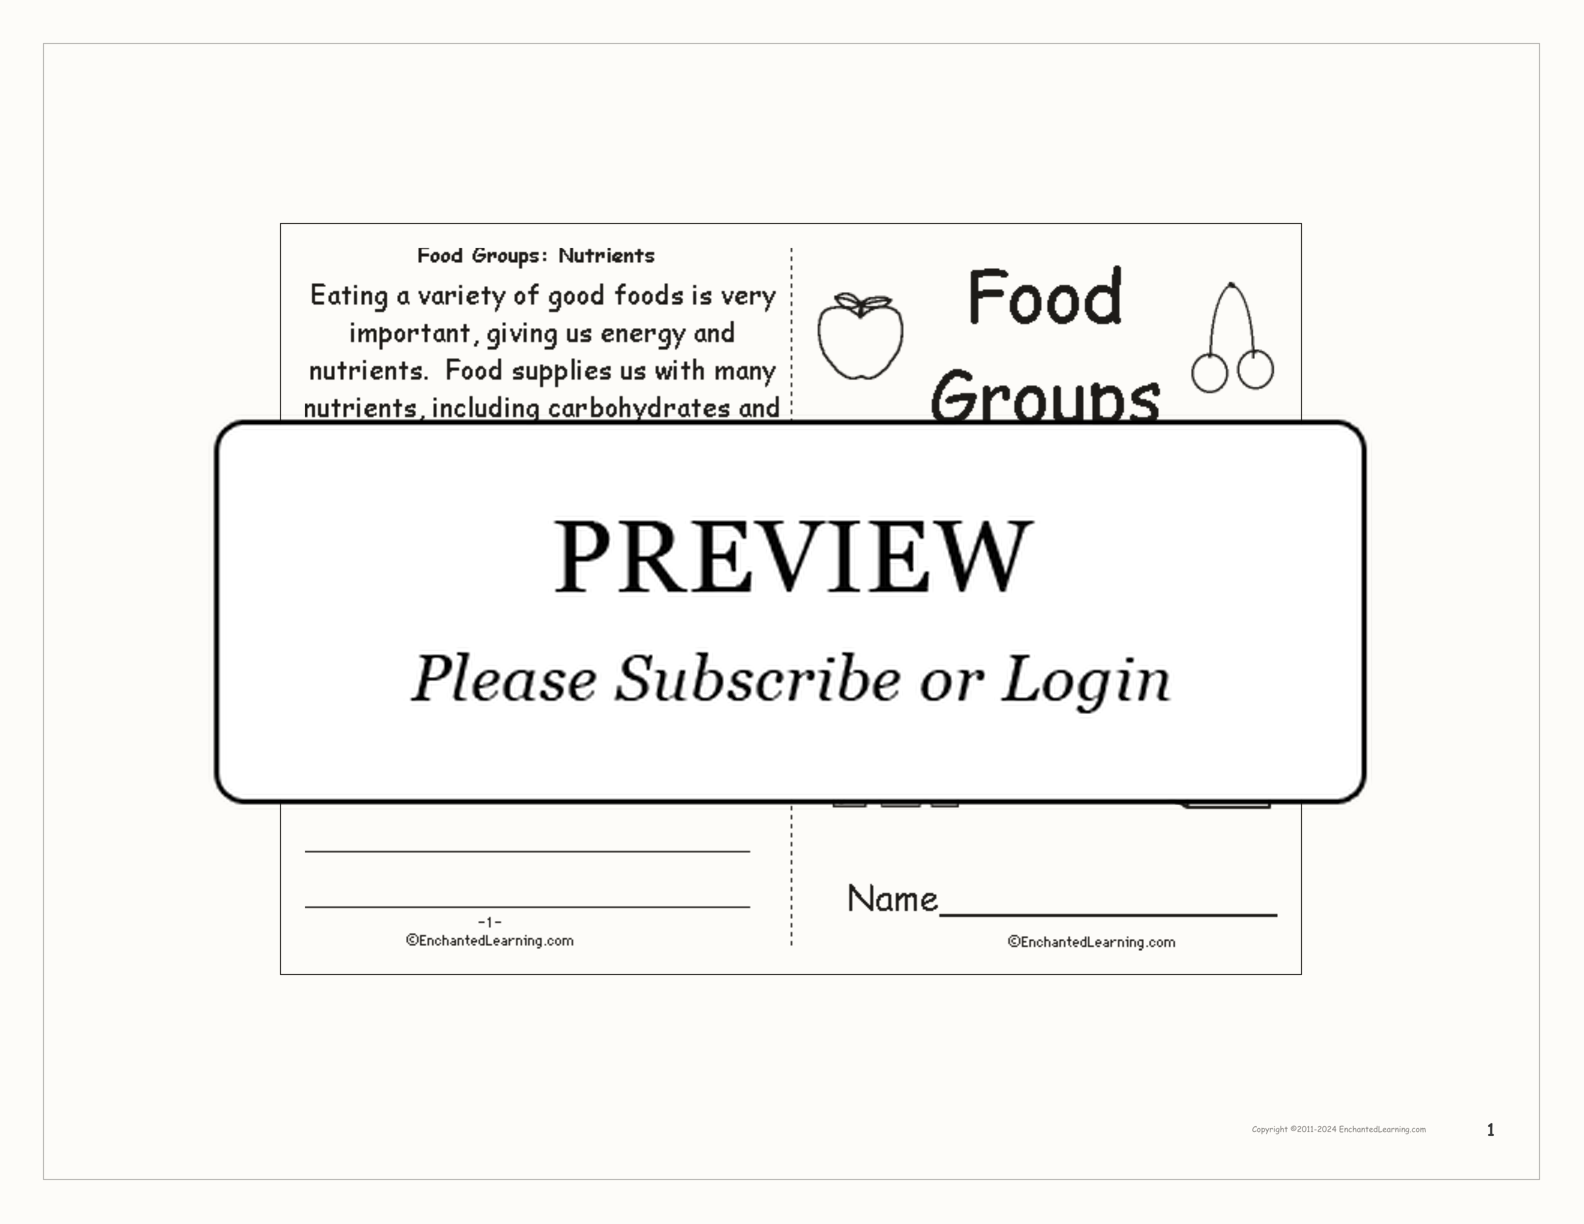 'Food Groups: My Food Plate' Book interactive printout page 1